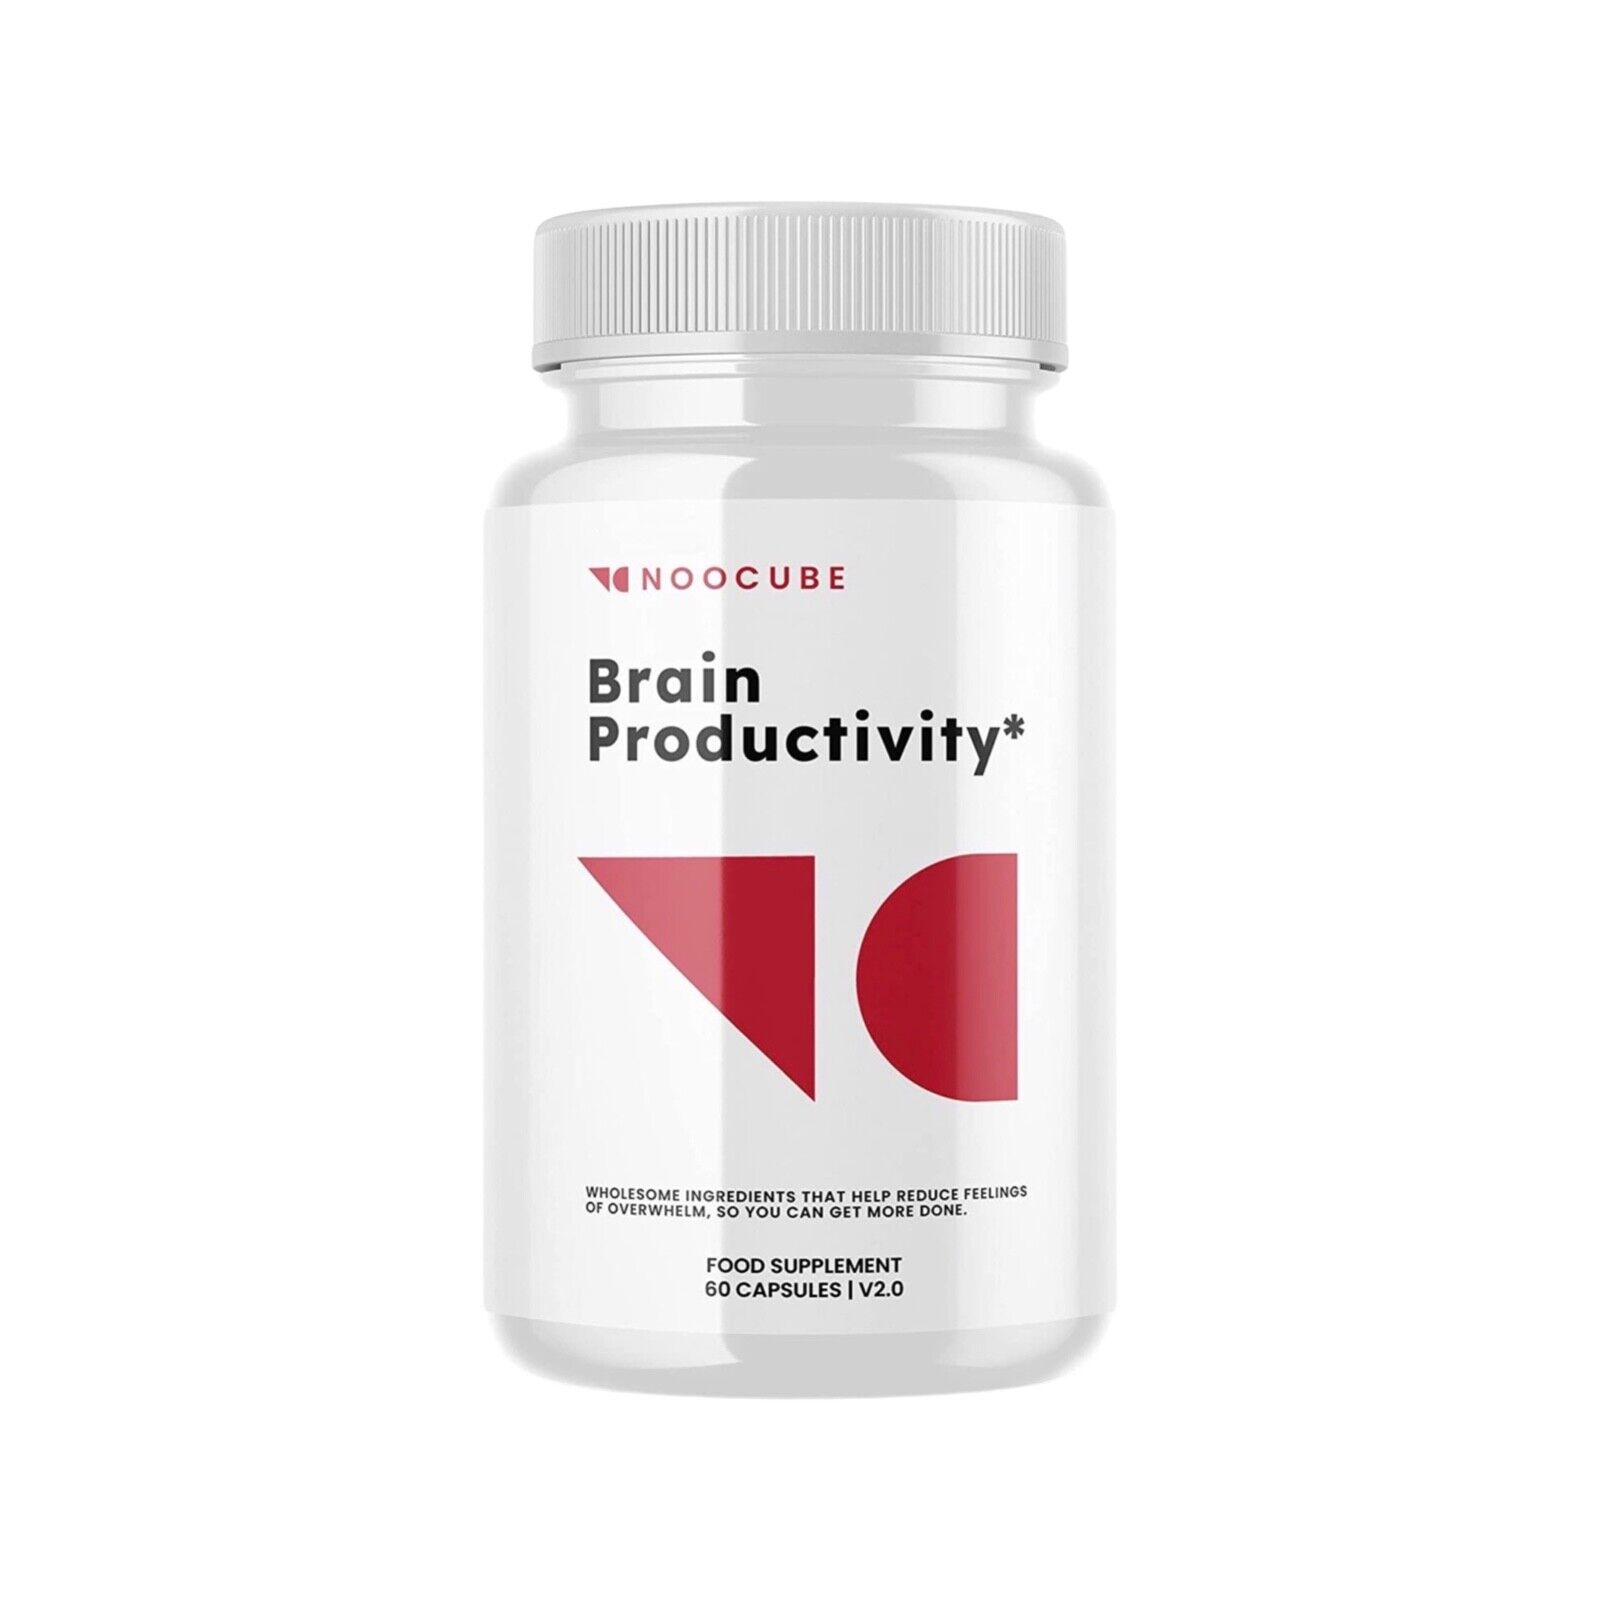 Noocube Brain Productivity Pills, Cognitive & Memory Support-60 Capsules